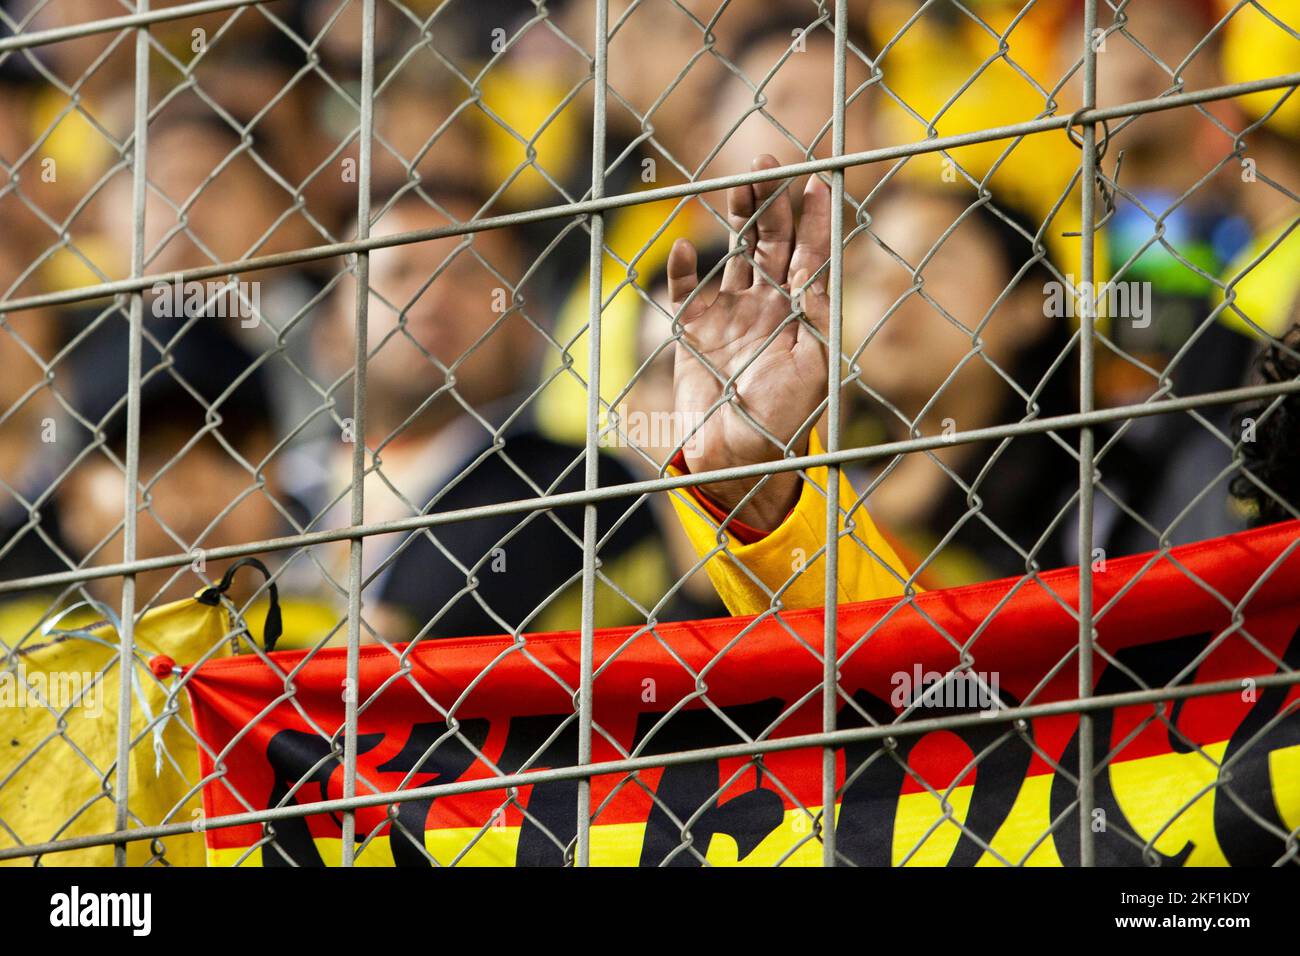 Quito, Ecuador - Ligapro final 2022 Aucas vs Barcelona SC. Barcelona sporting fans hand on the railing during visiting game of the championship final Stock Photo